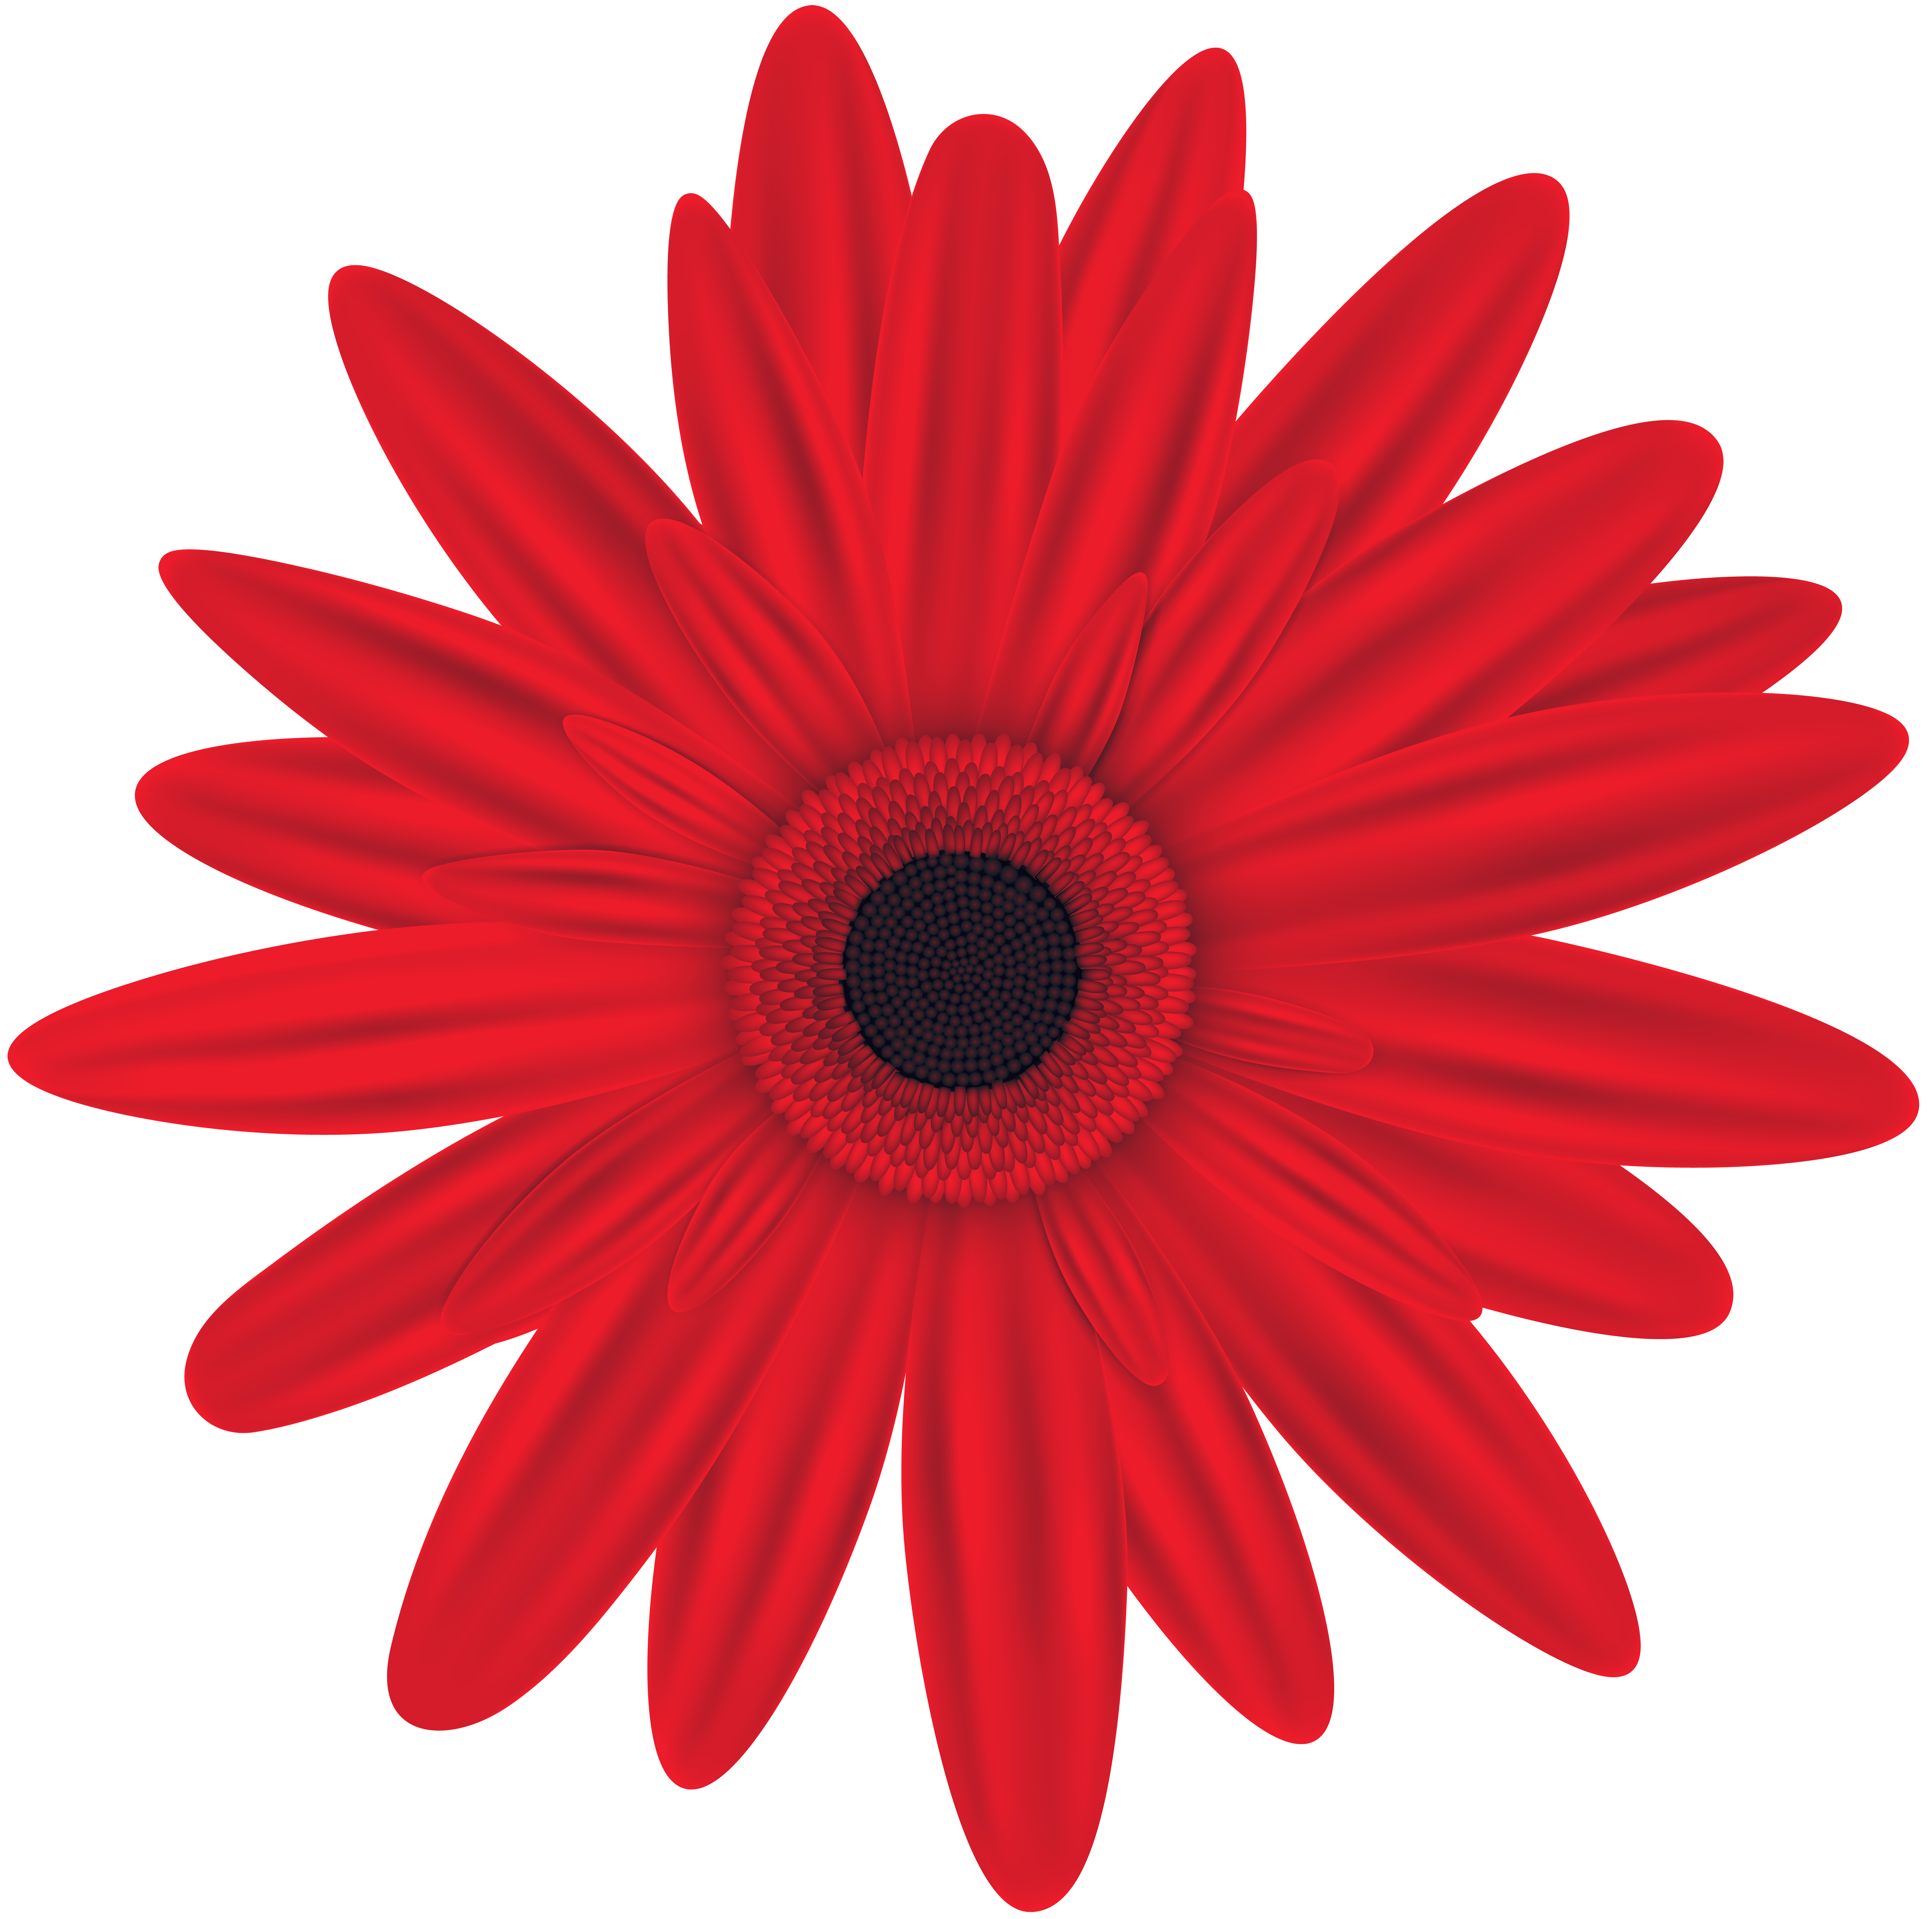 https://gallery.yopriceville.com/var/albums/Free-Clipart-Pictures/Flowers-PNG/Red_Flower_Clip_Art_Image.png?m=1520847819